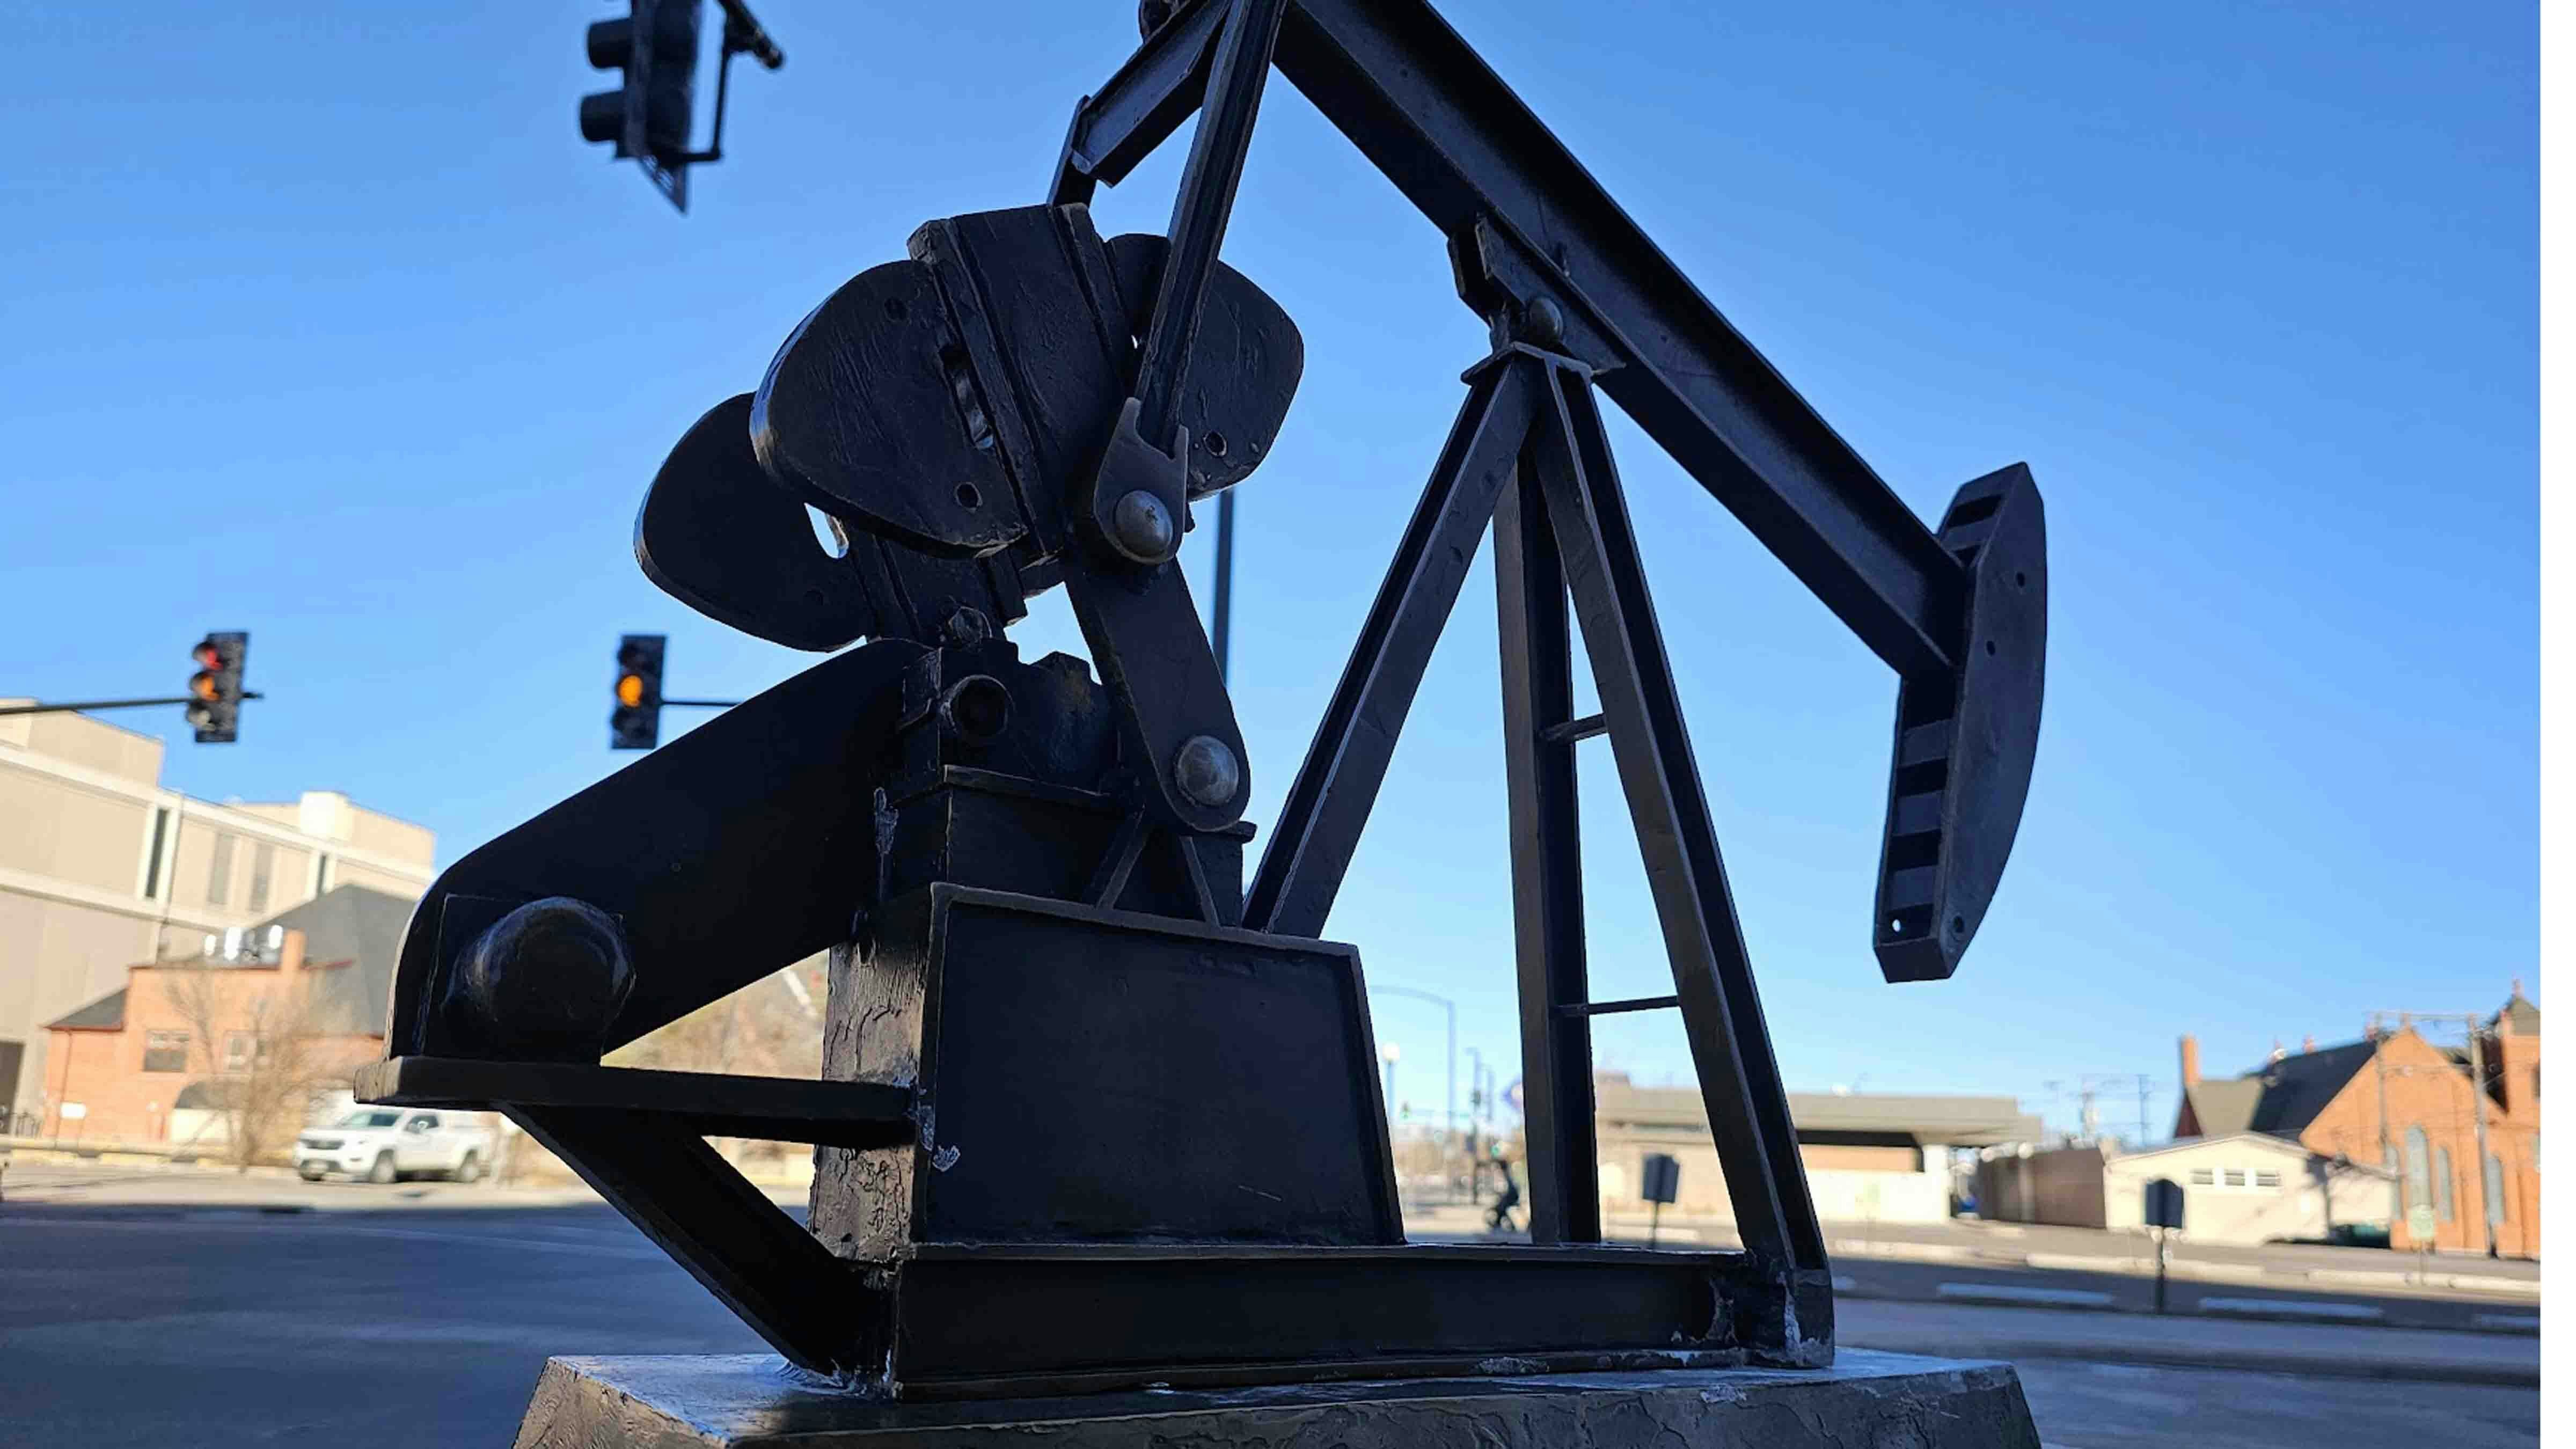 The Pump Jack, located at 19th street and Capitol, sculpted by Joey Banner and donated by Jonah Bank of Wyoming